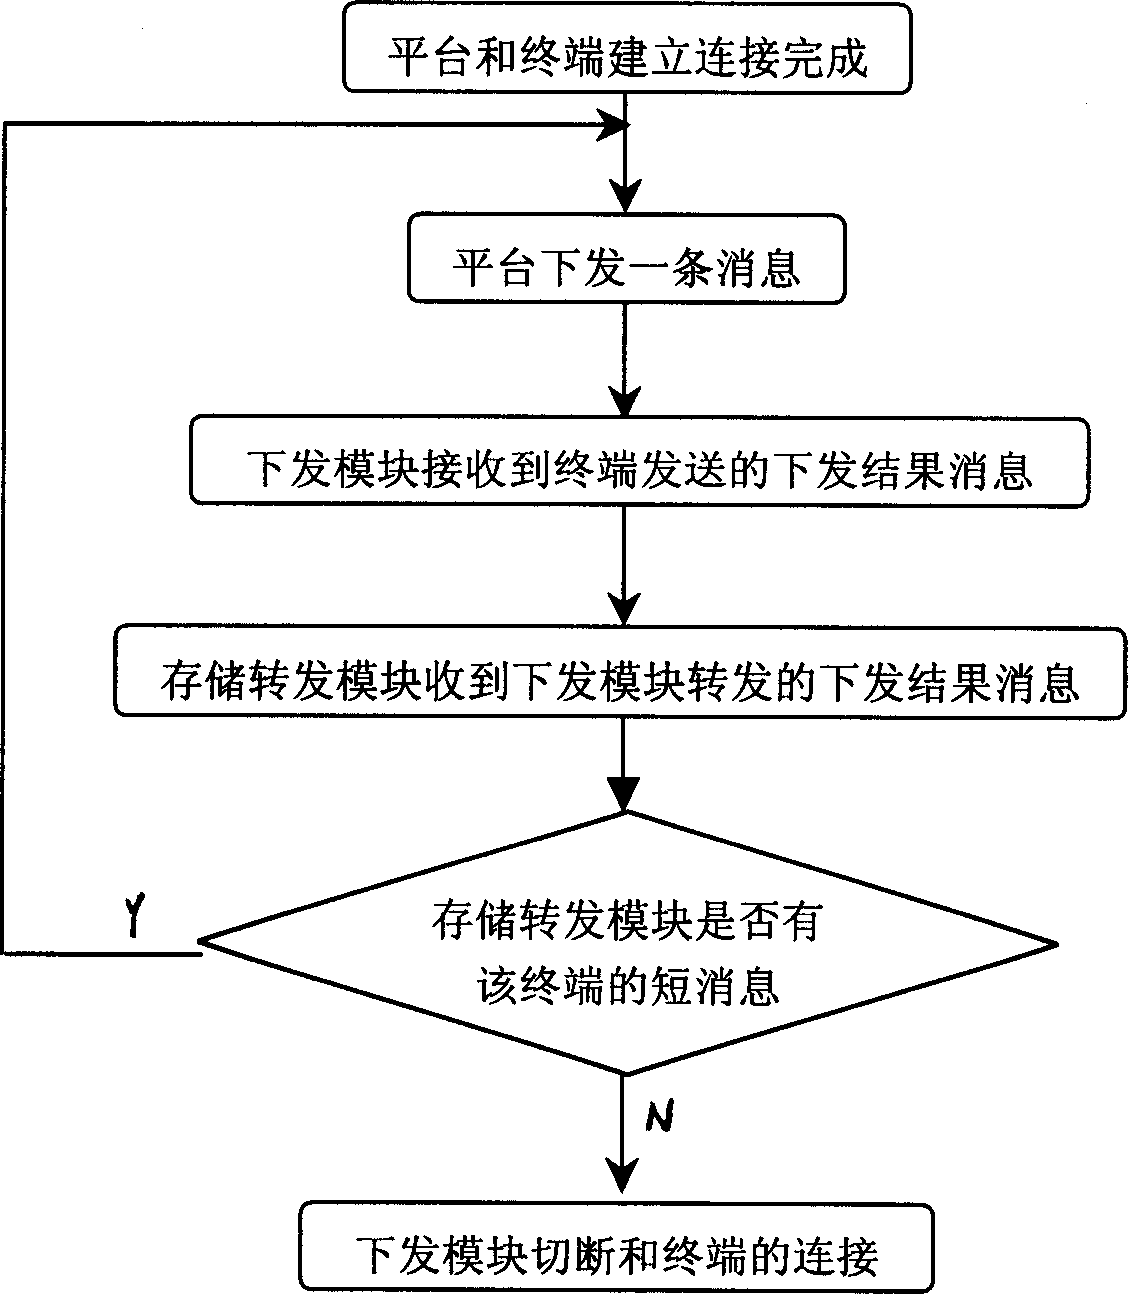 Method for quick sending short message in public telephone network short message system